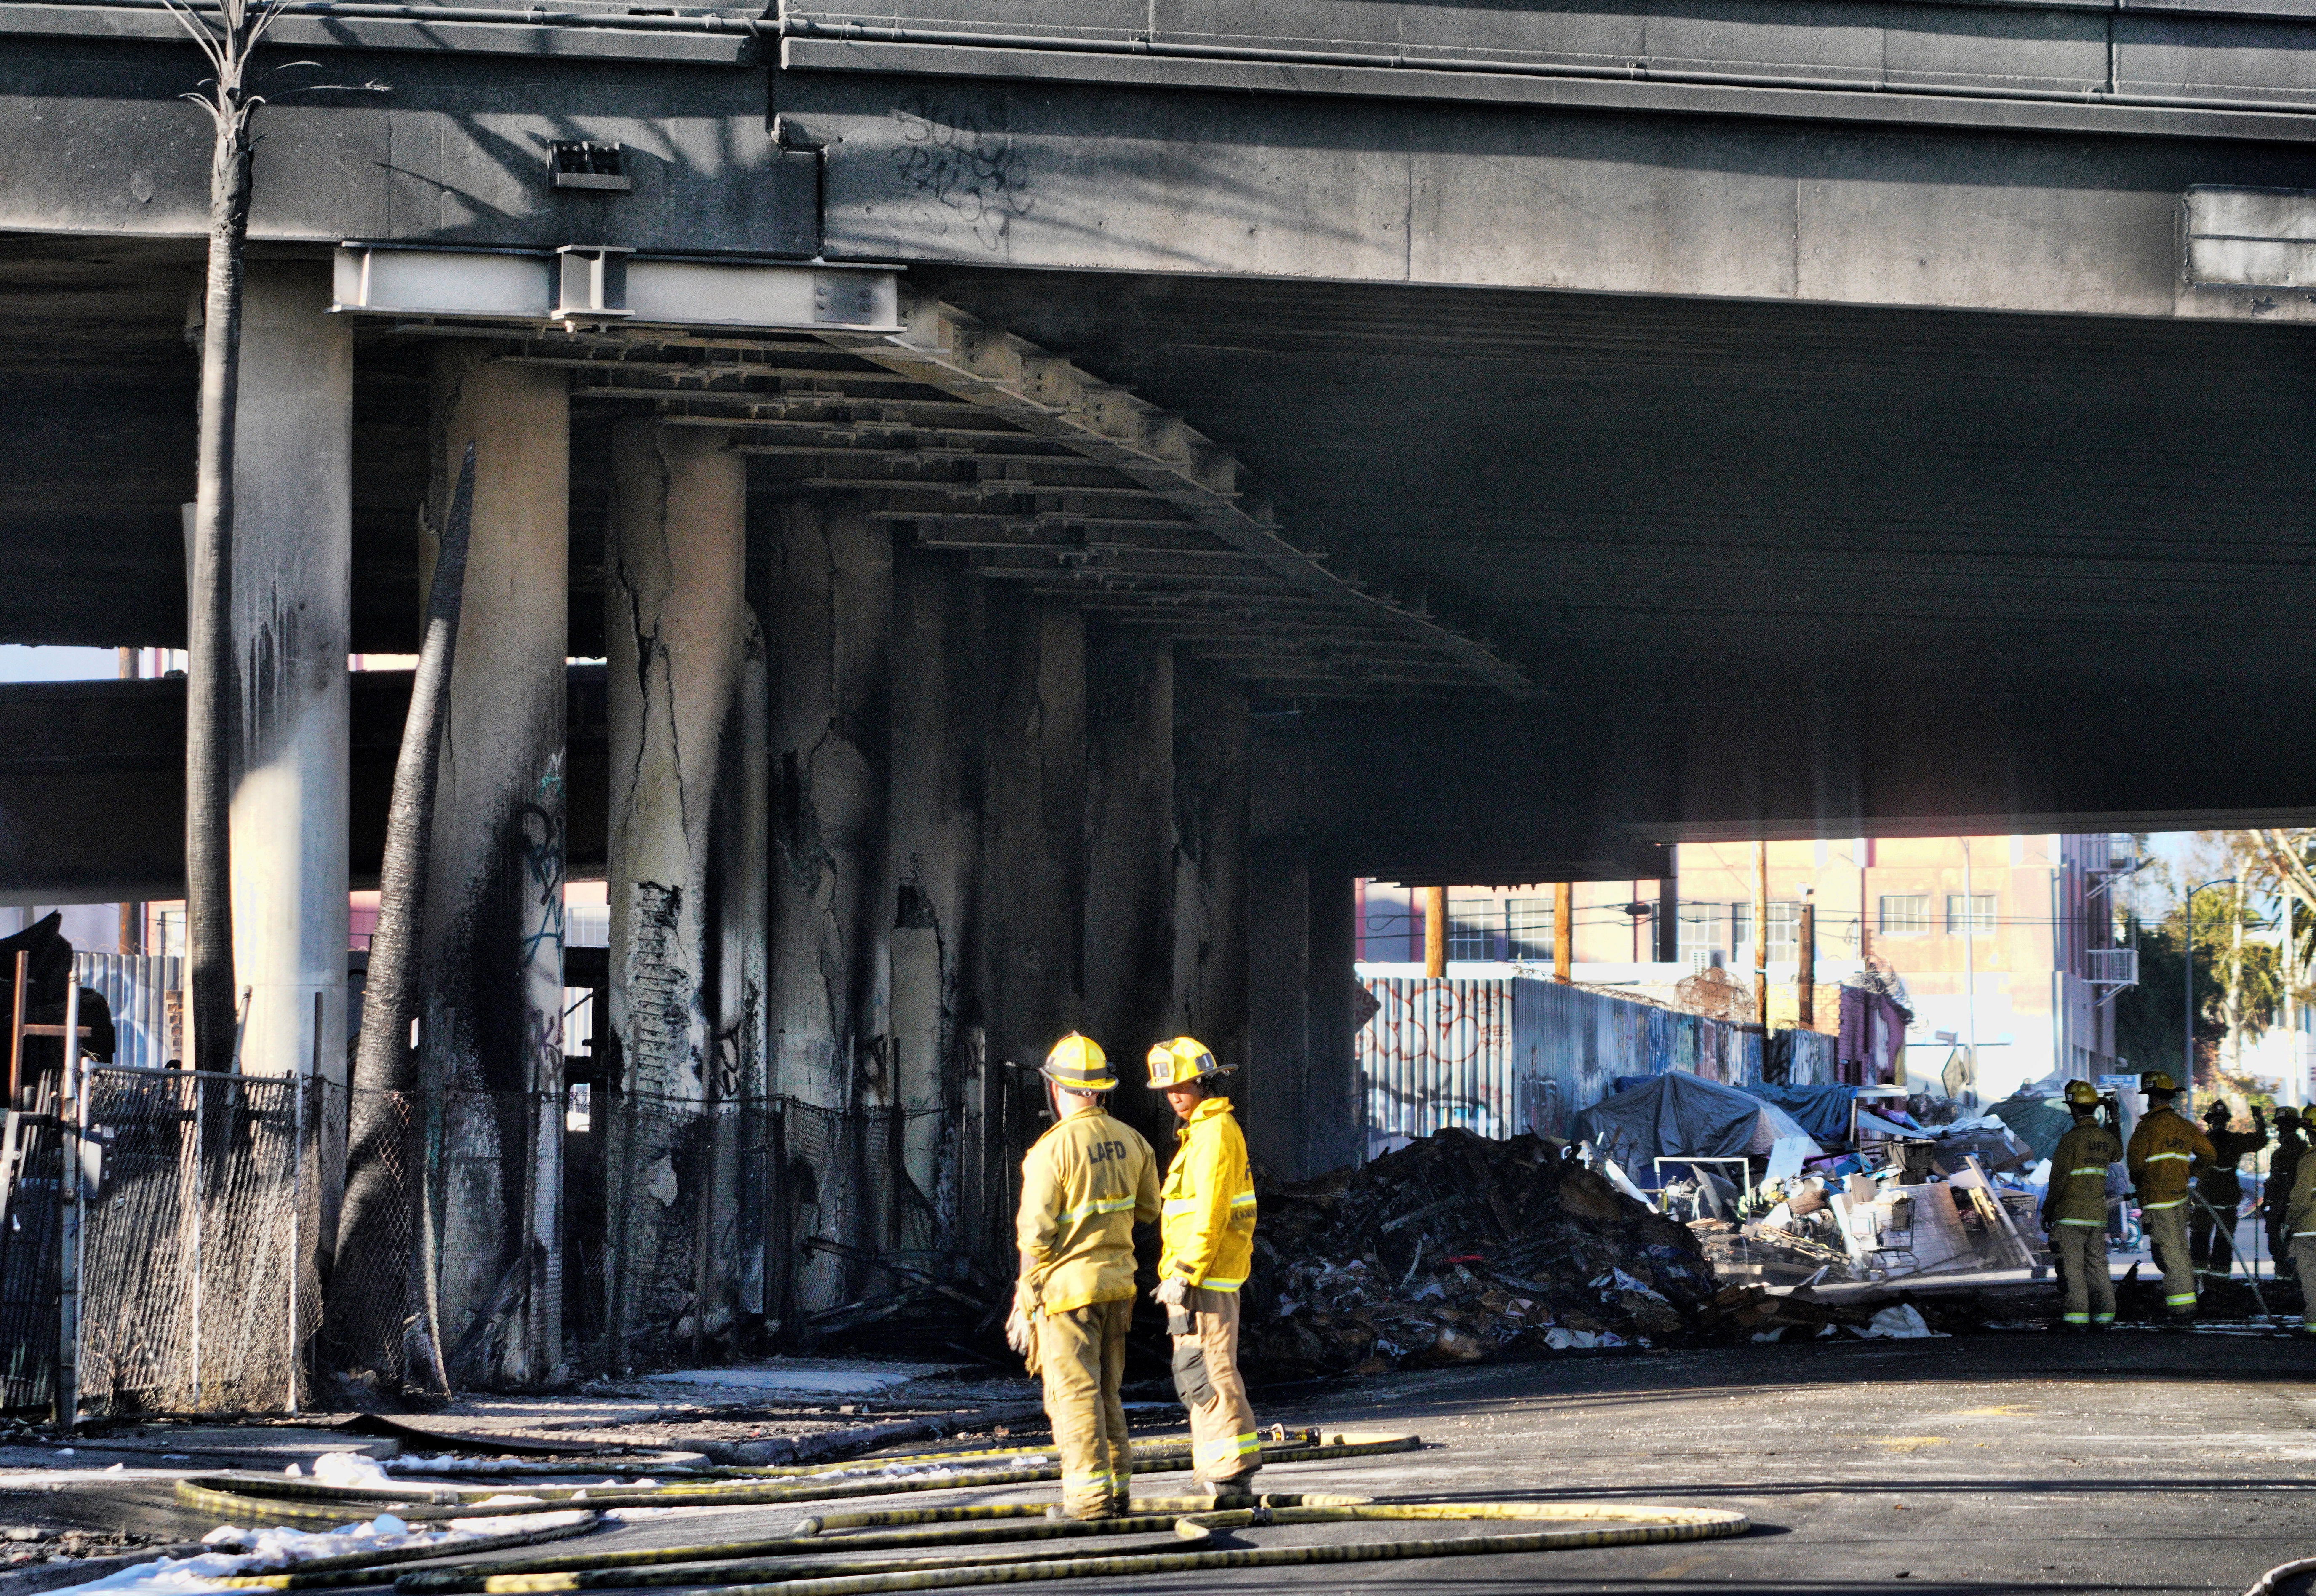 Firefighters assess the damage from a intense fire under Interstate 10 that severely damaged the overpass in an industrial zone near downtown Los Angeles on Saturday